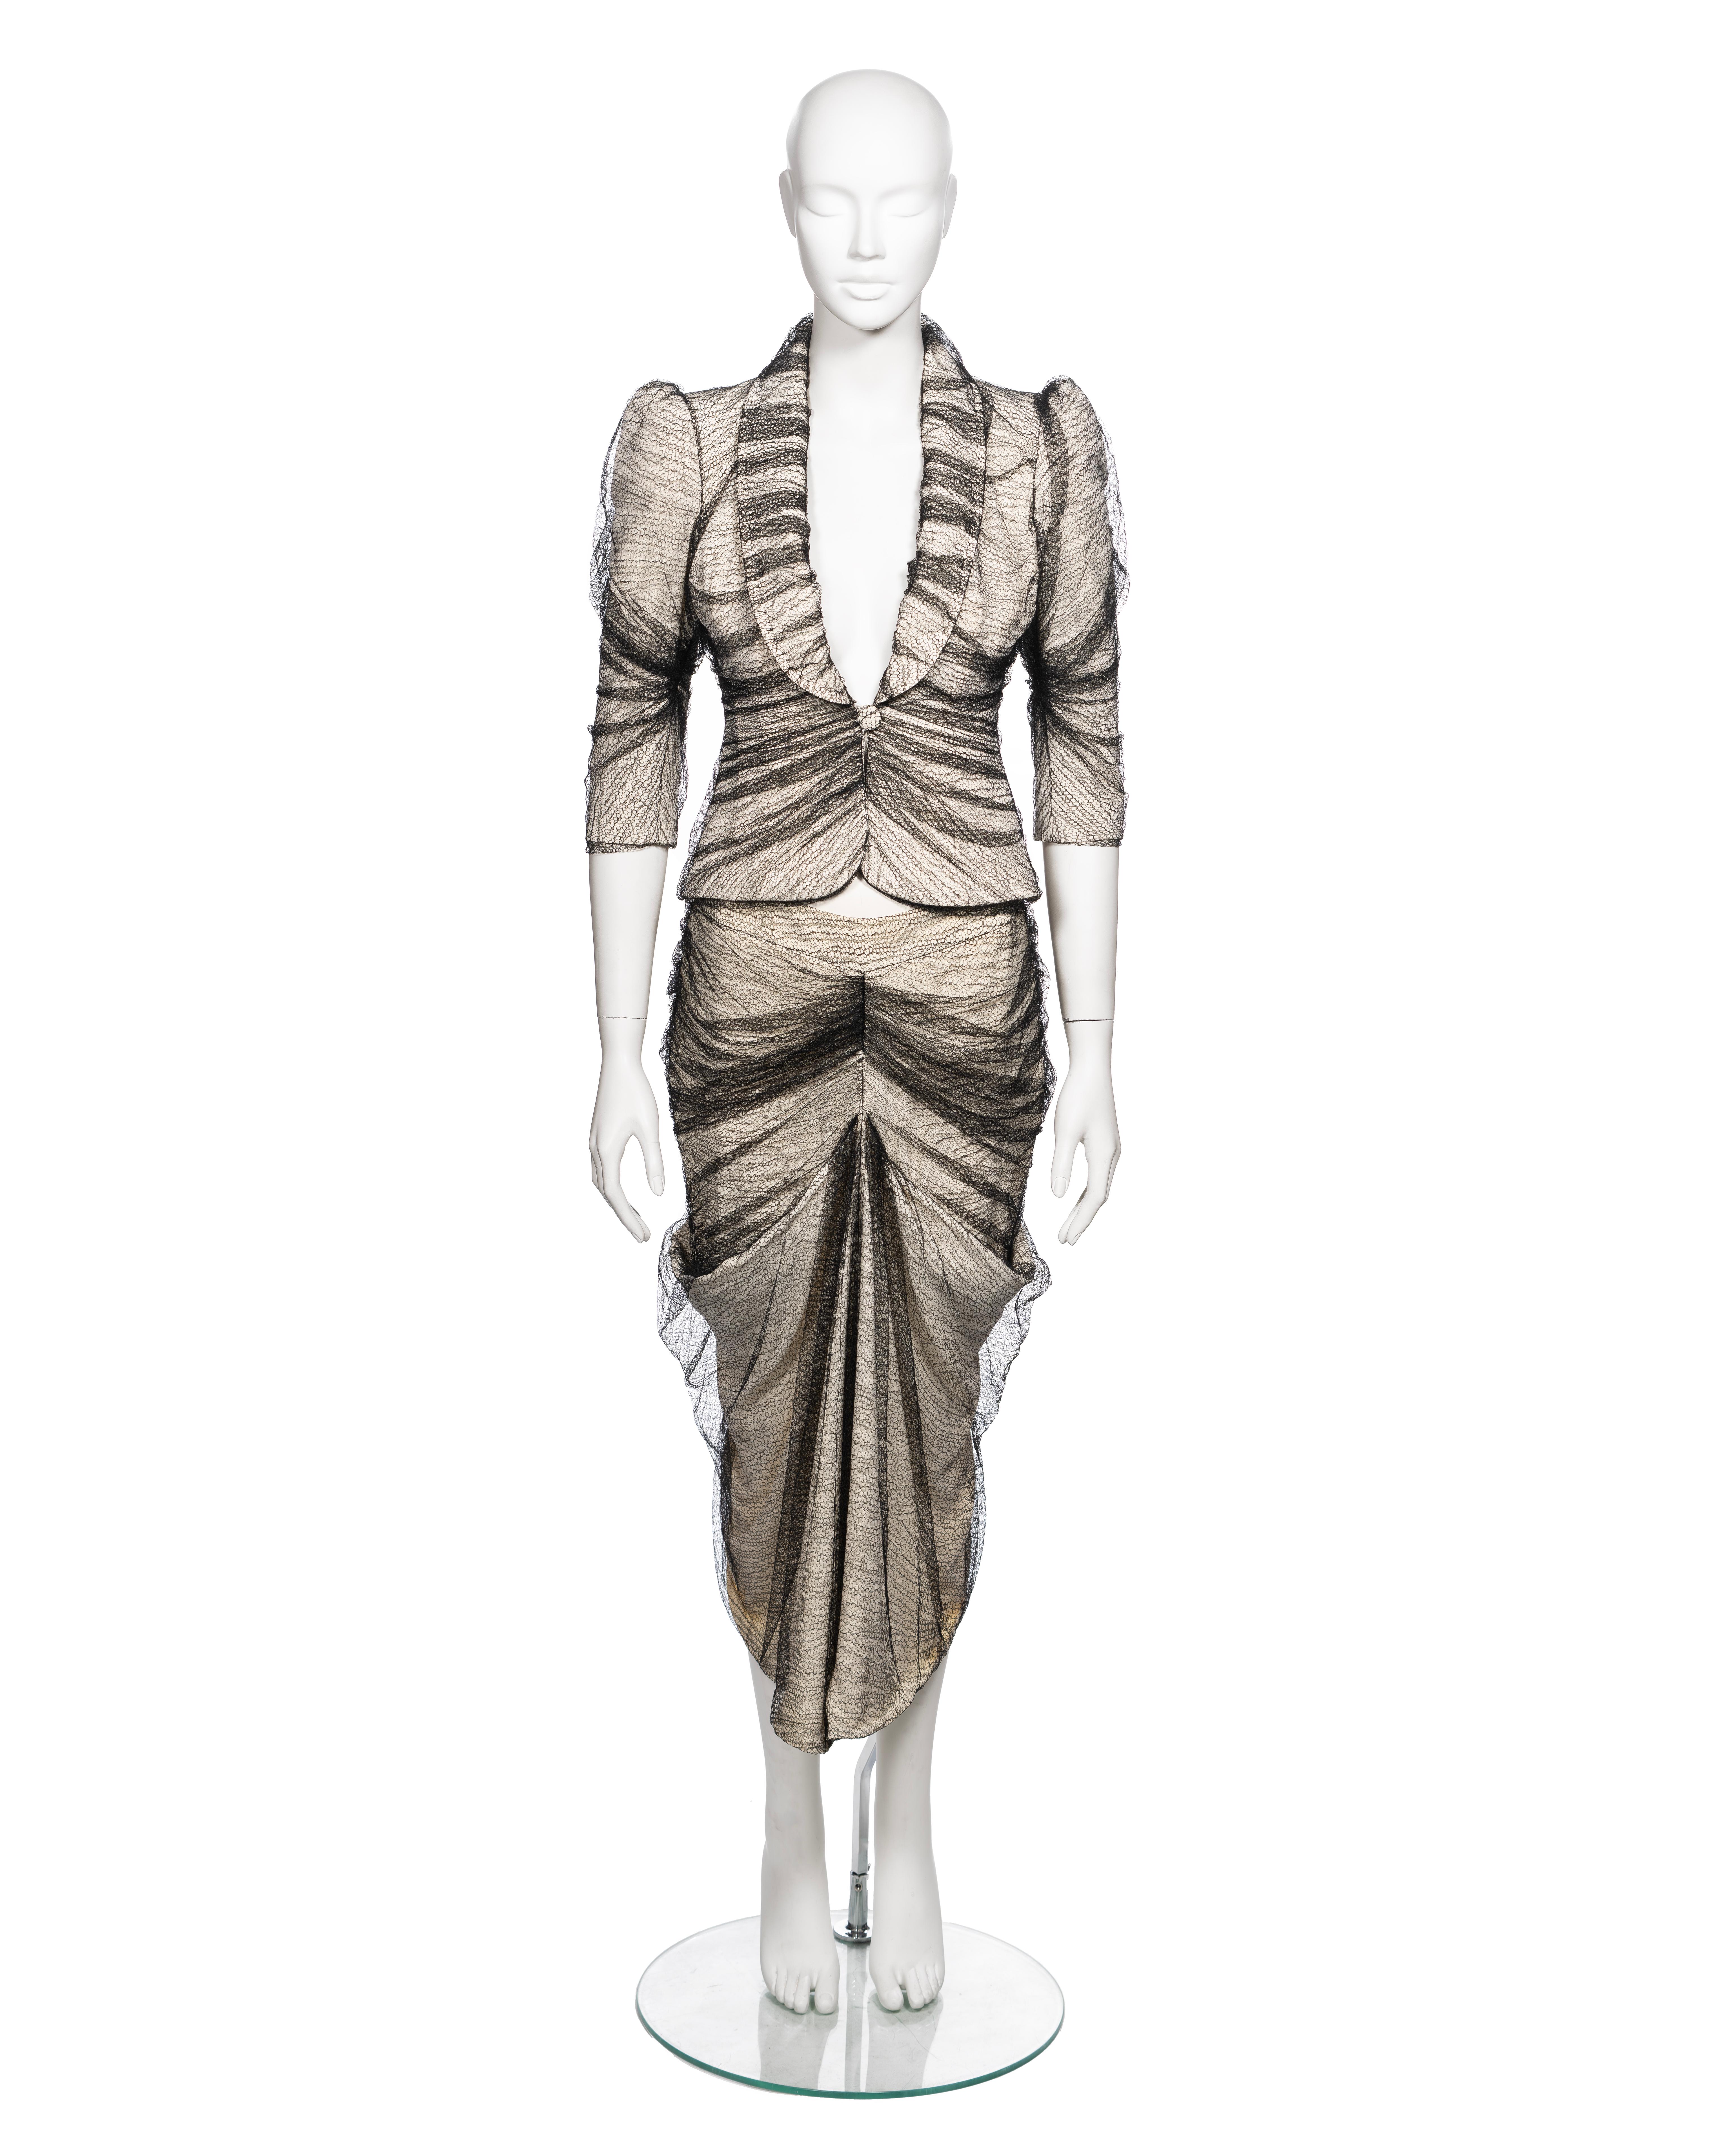 ▪ Brand: Alexander McQueen
▪ Creative Director: Alexander McQueen
▪ Collection: Sarabande, Spring-Summer 2007
▪ Fabric: Acetate, Viscose, Polyamide 
▪ Size: IT38 - FR34 - UK6 - US2
▪ Made in: Italy
▪ Condition: Excellent
▪ Mannequin: 183 cm / 6ft